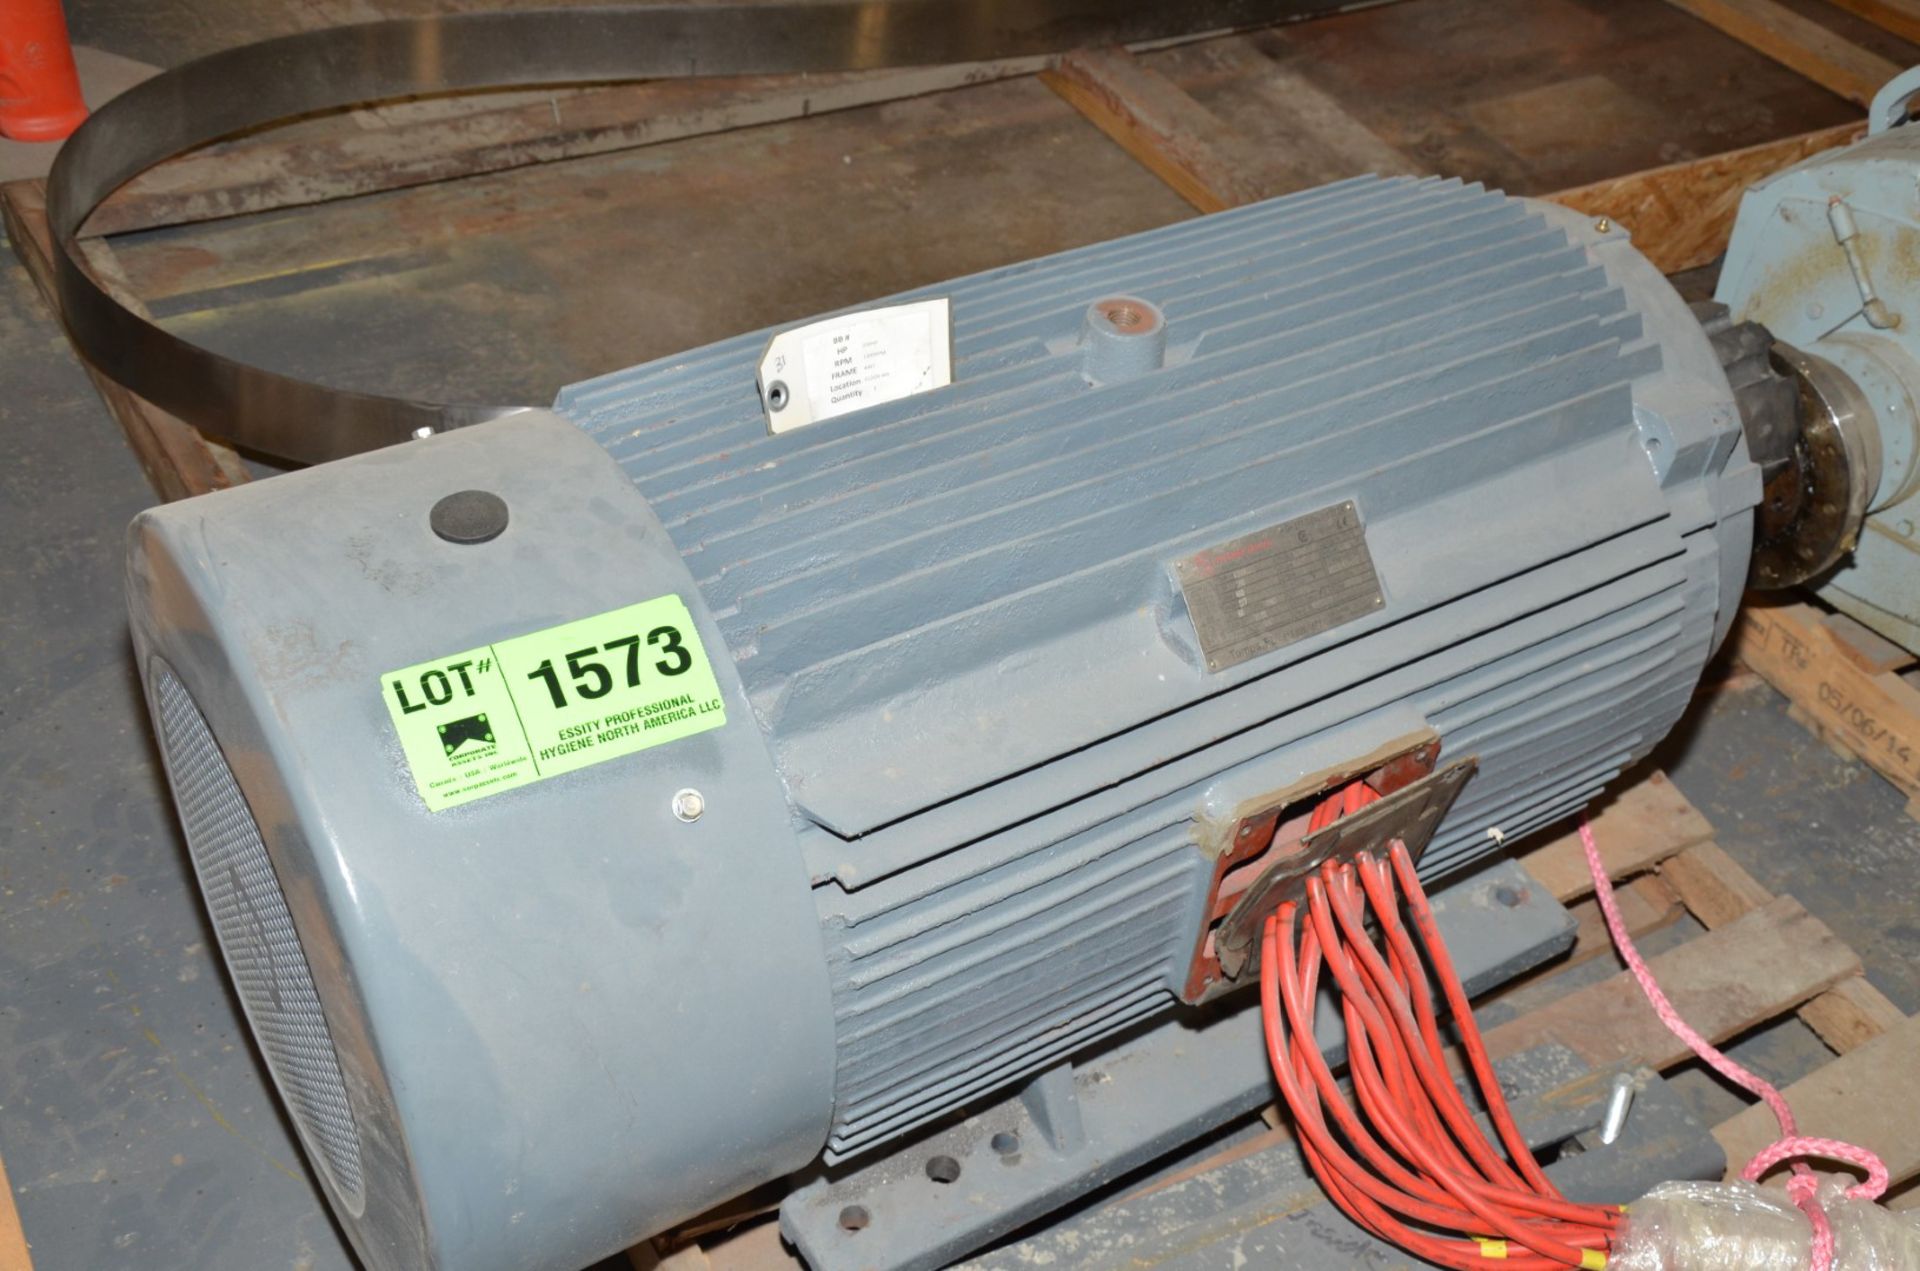 LIVL 200 HP 1180 RPM ELECTRIC MOTOR [RIGGING FEE FOR LOT #1573 - $50 USD PLUS APPLICABLE TAXES]